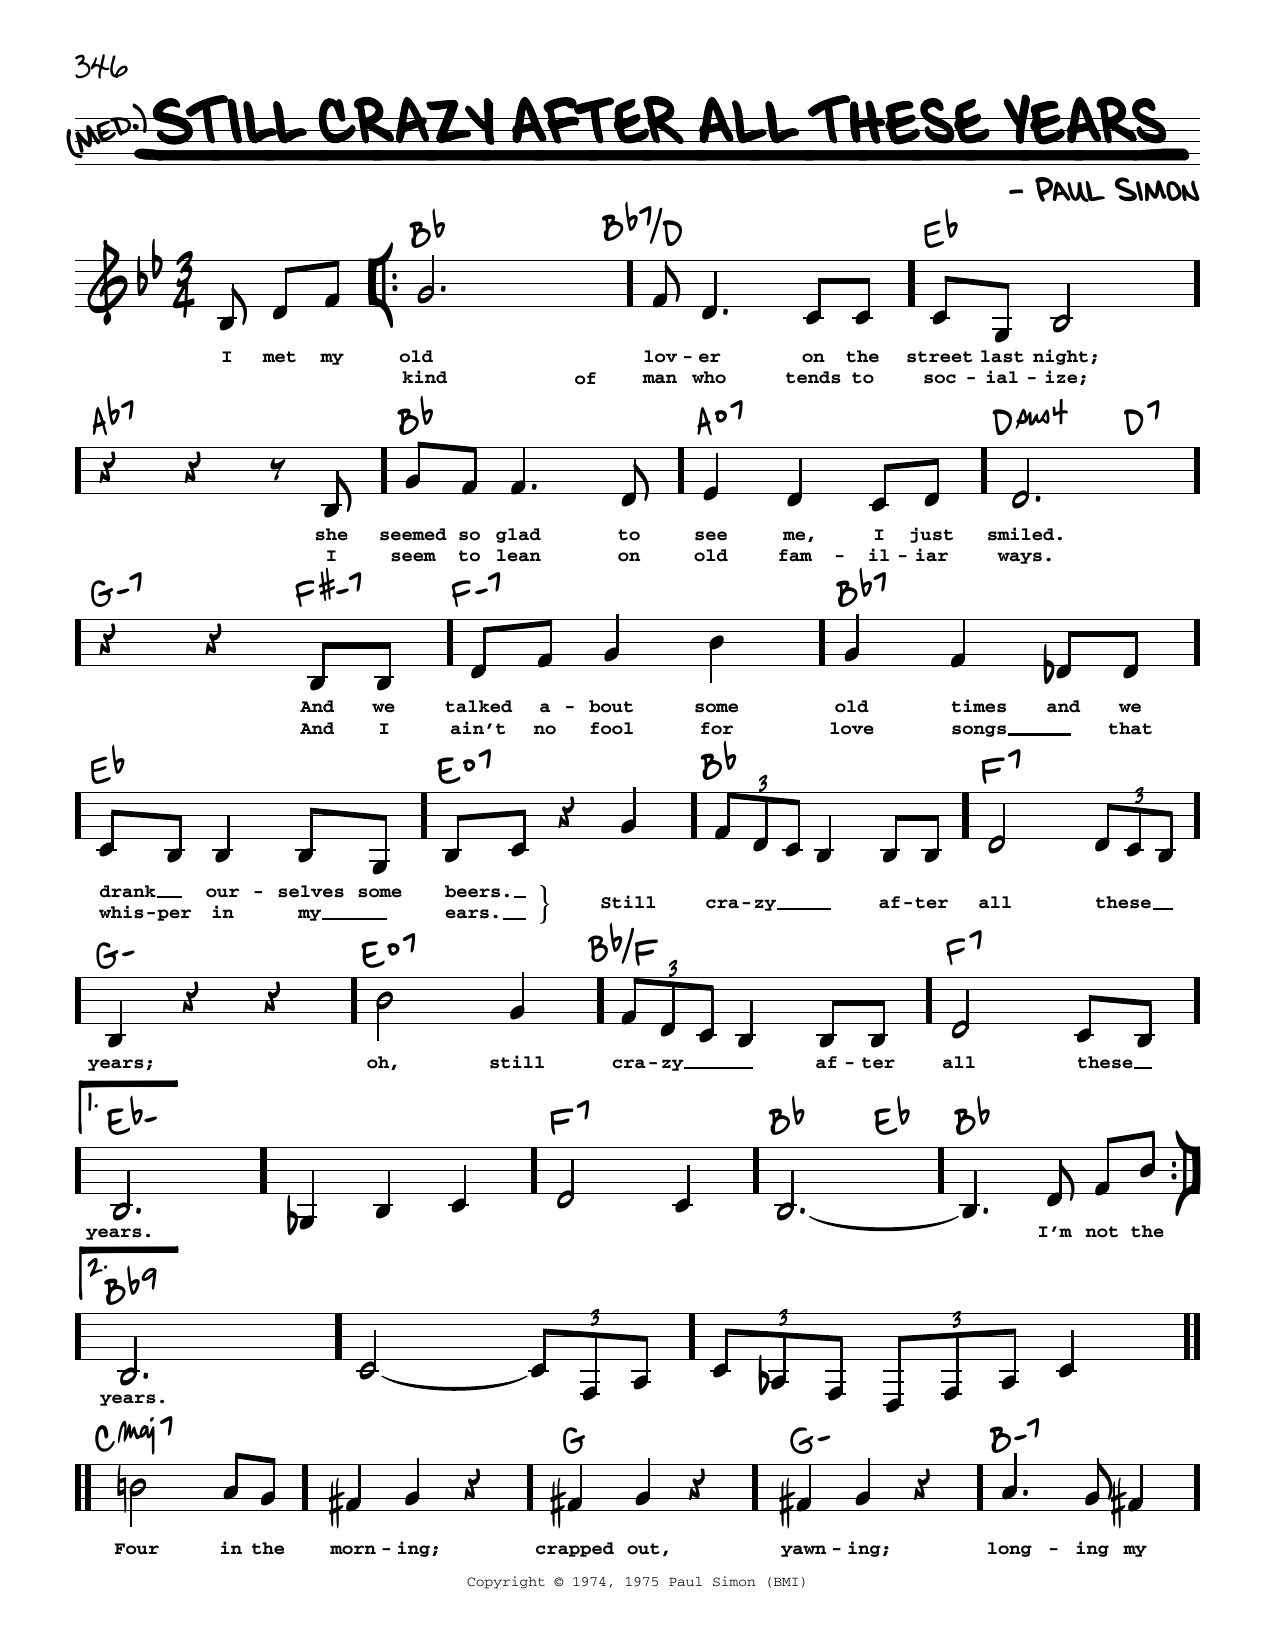 Simon & Garfunkel Still Crazy After All These Years (Low Voice) sheet music notes printable PDF score